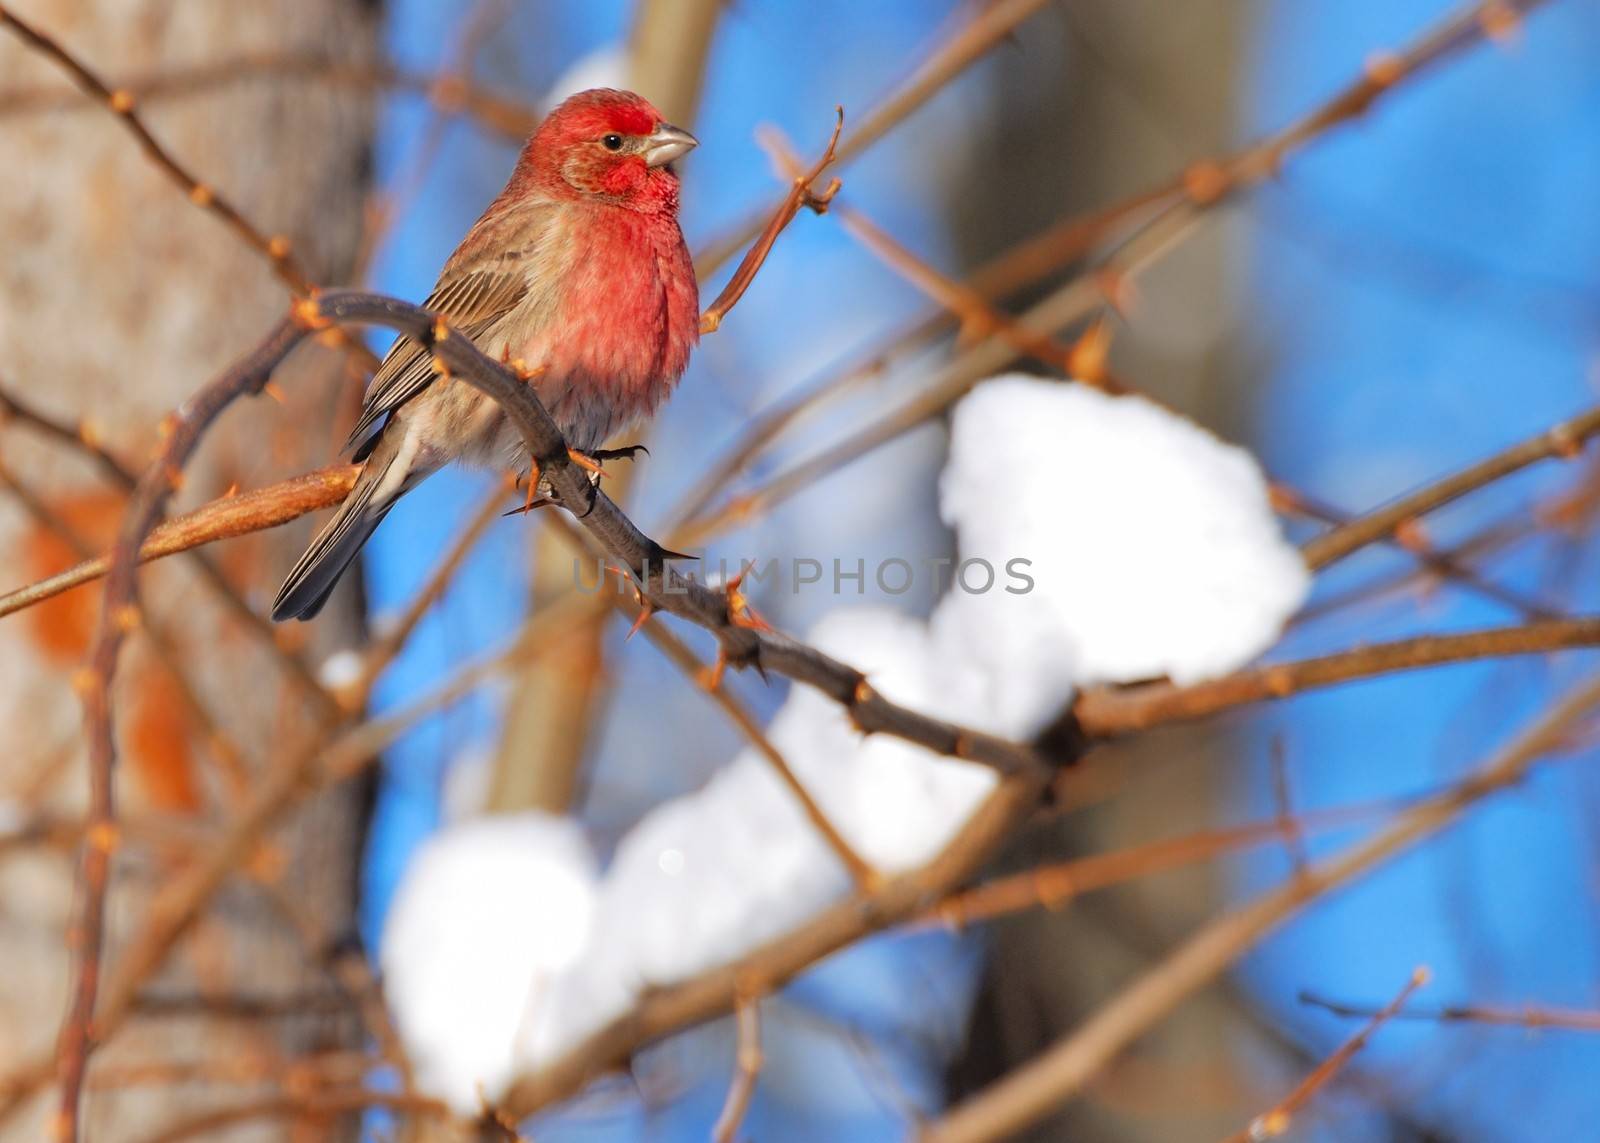 Red Finch perched on a tree branch.